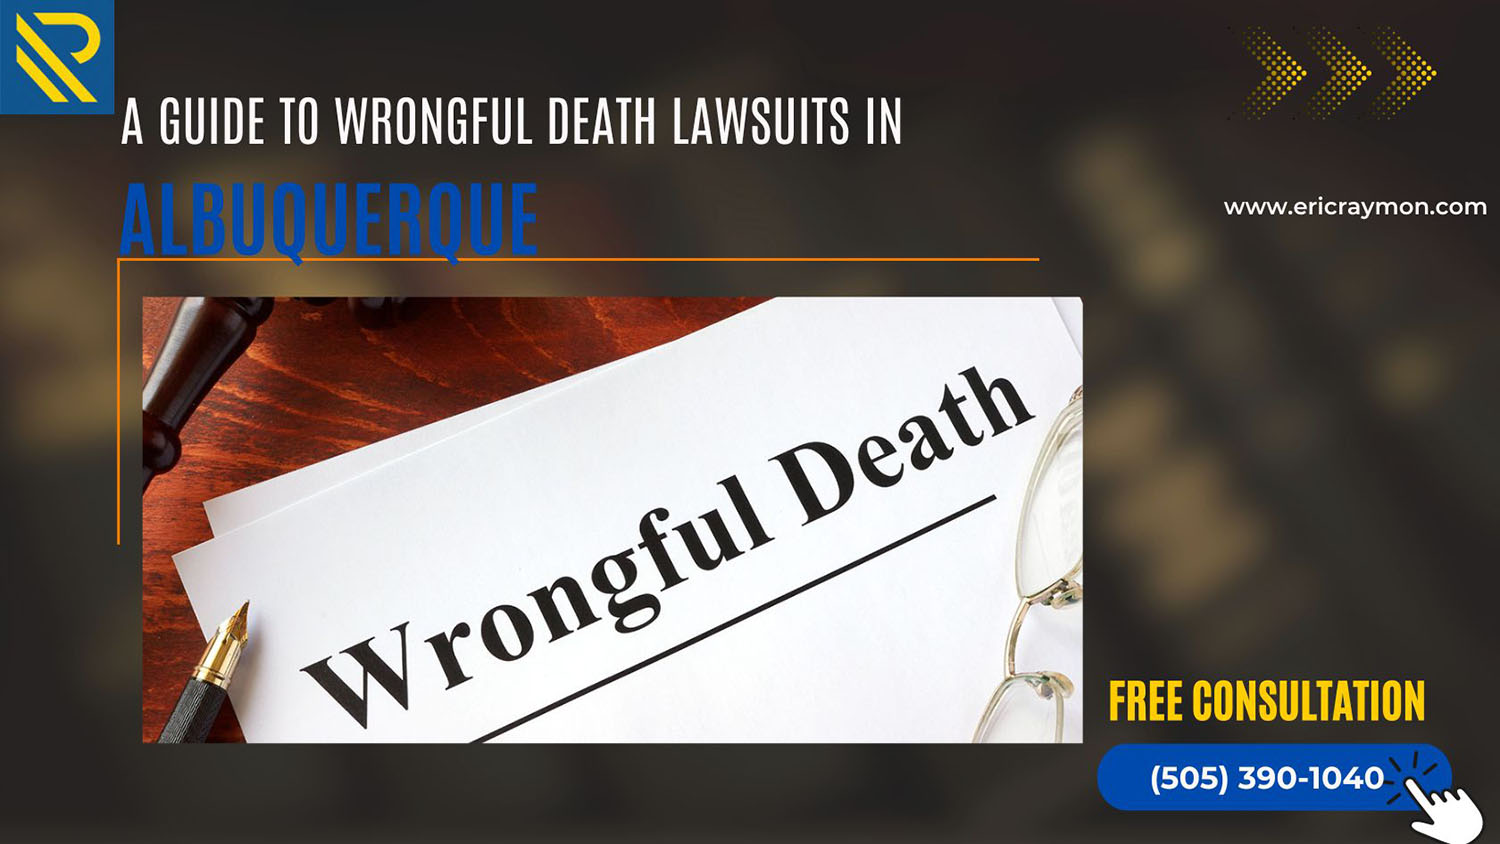 A Guide to Wrongful Death Lawsuits in Albuquerque: Raymon Law Group